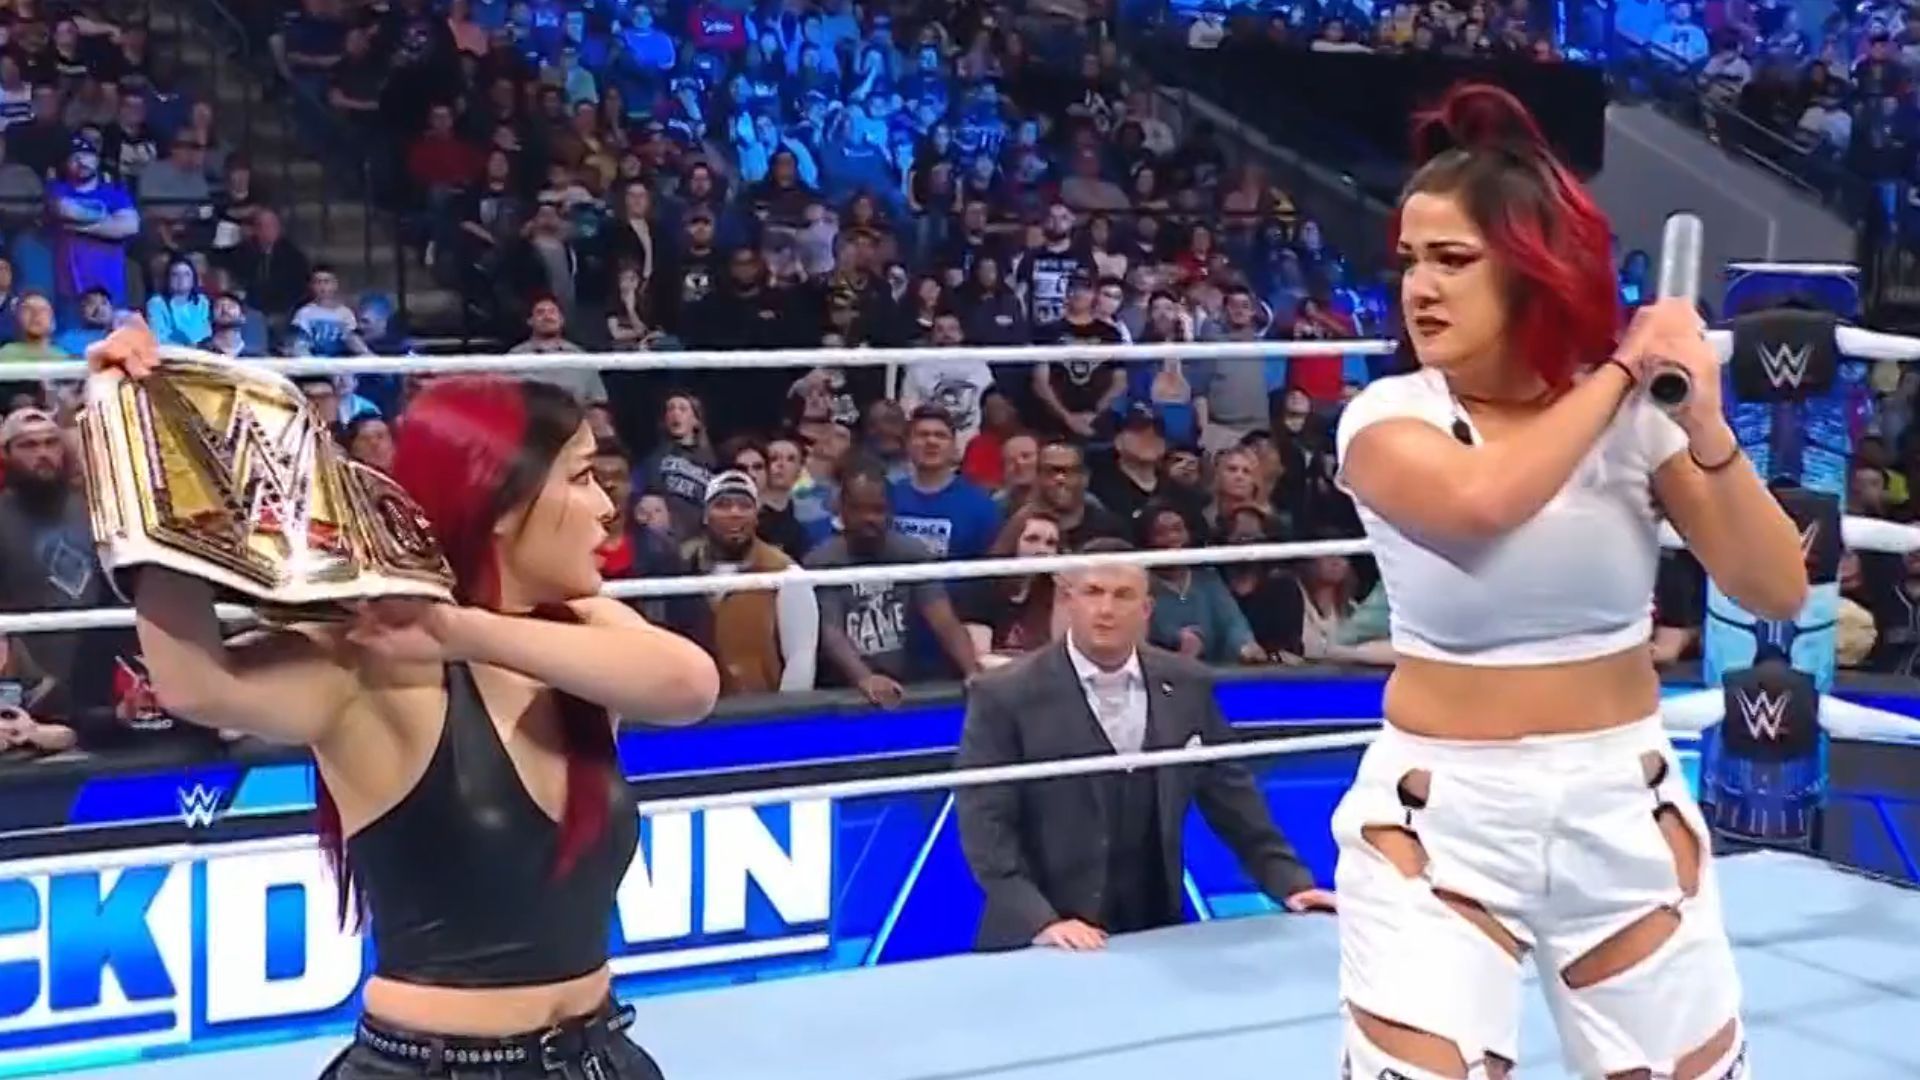 IYO SKY vs. Bayley is official for WrestleMania 40.